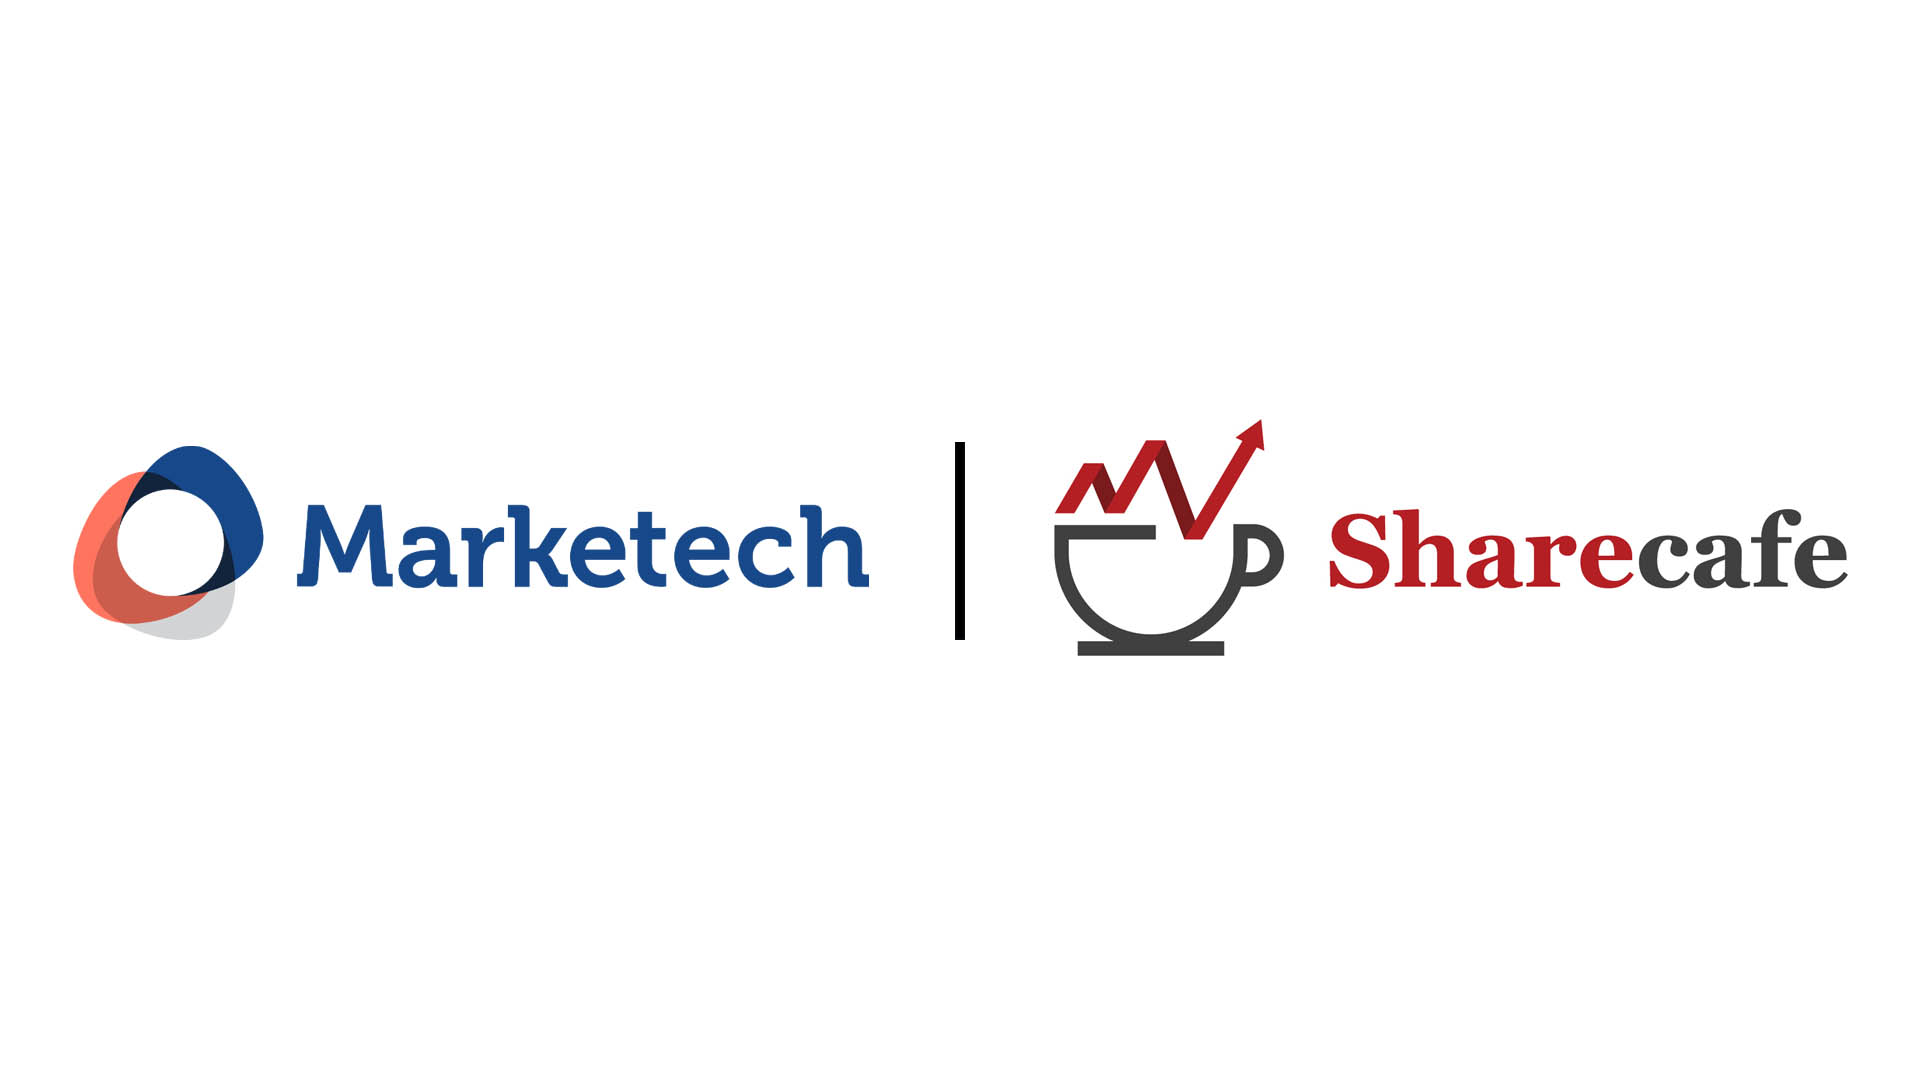 ShareCafe & Marketech Focus – one platform to stay fully informed!